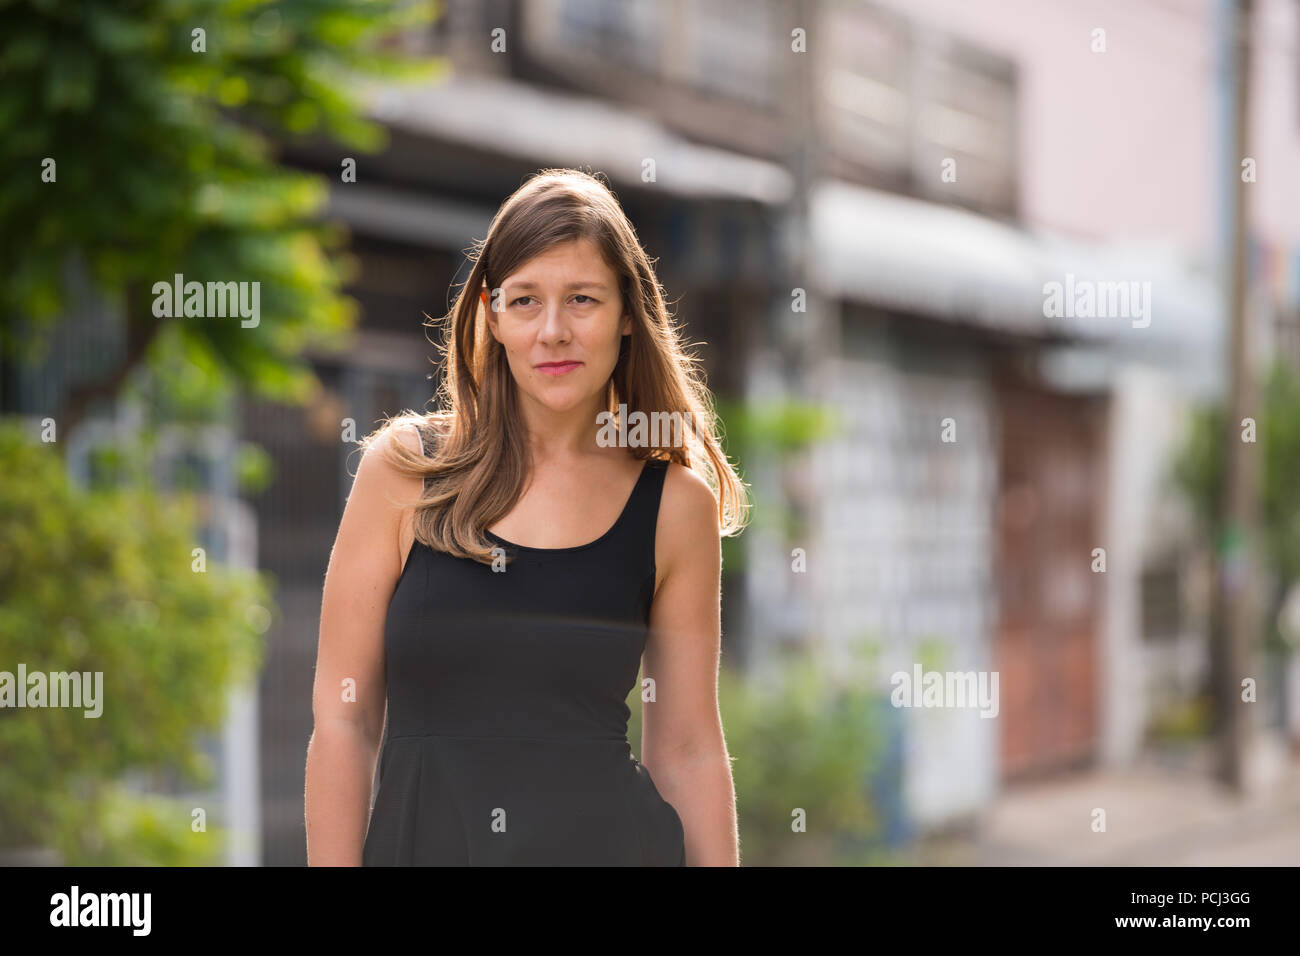 Young beautiful woman in the streets outdoors Stock Photo